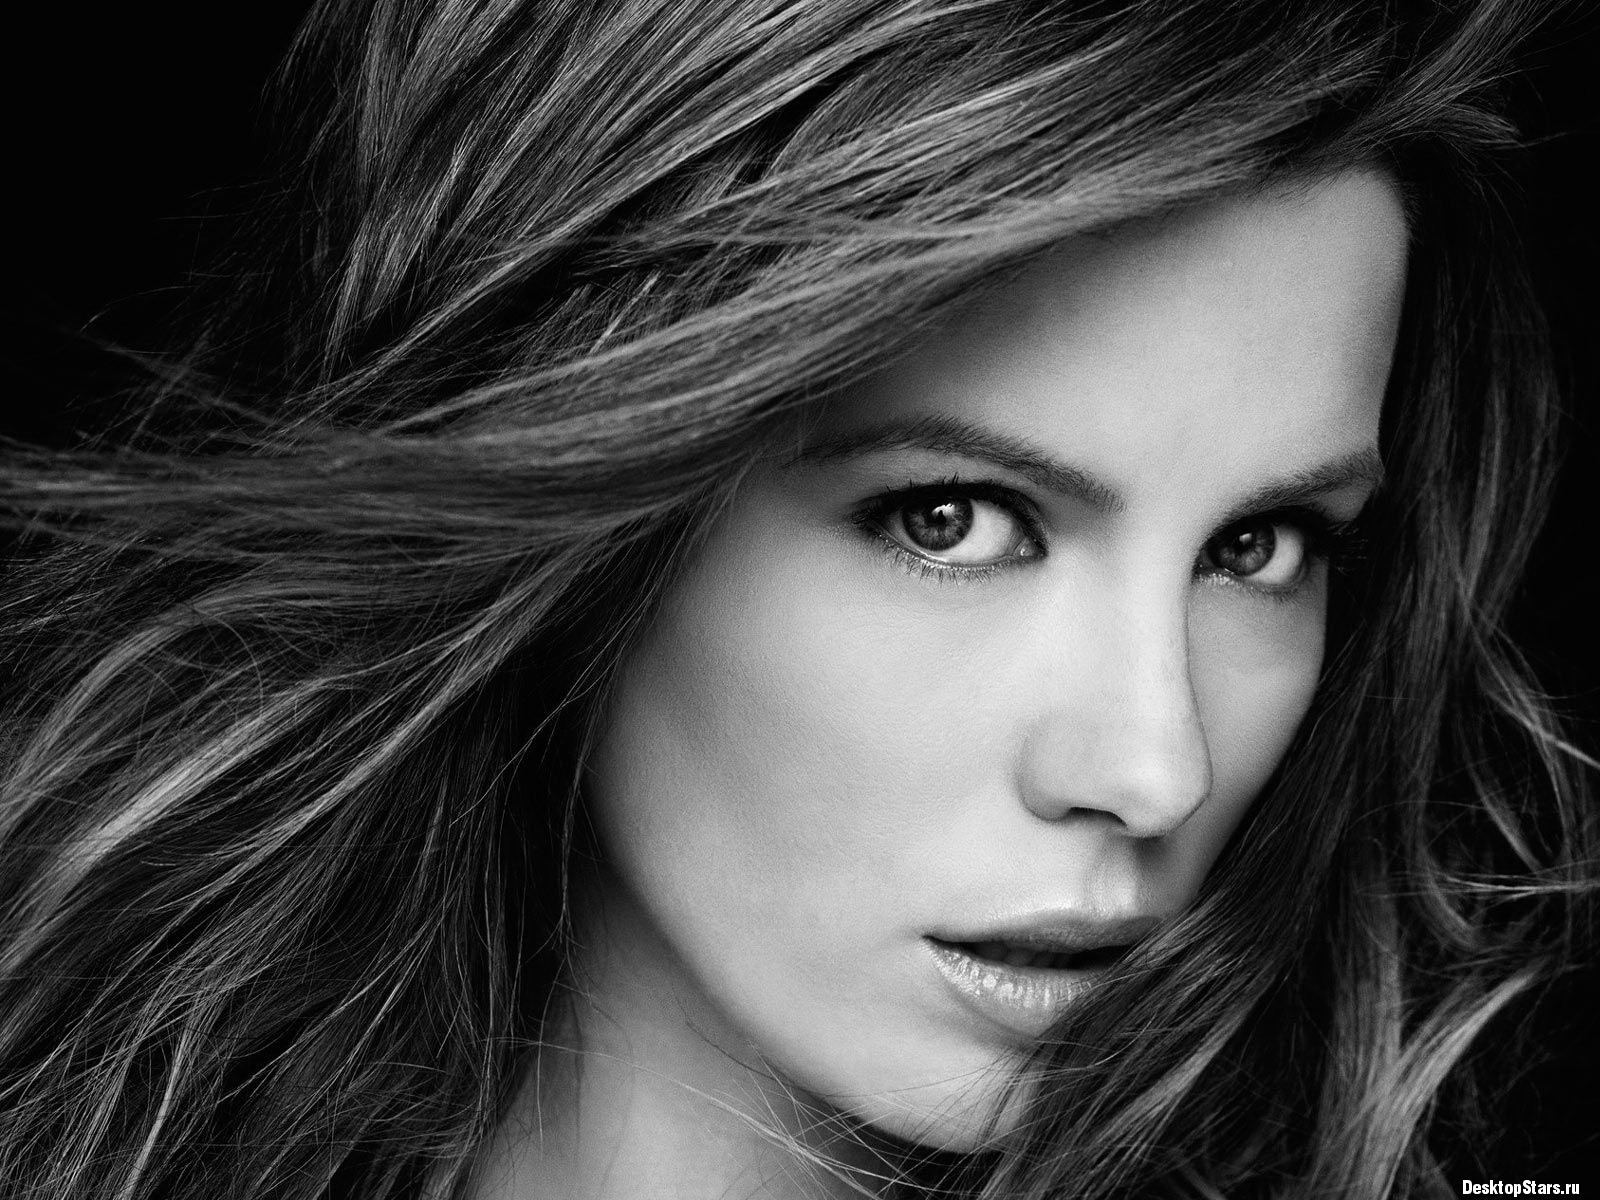 Kate Beckinsale #022 - 1600x1200 Wallpapers Pictures Photos Images